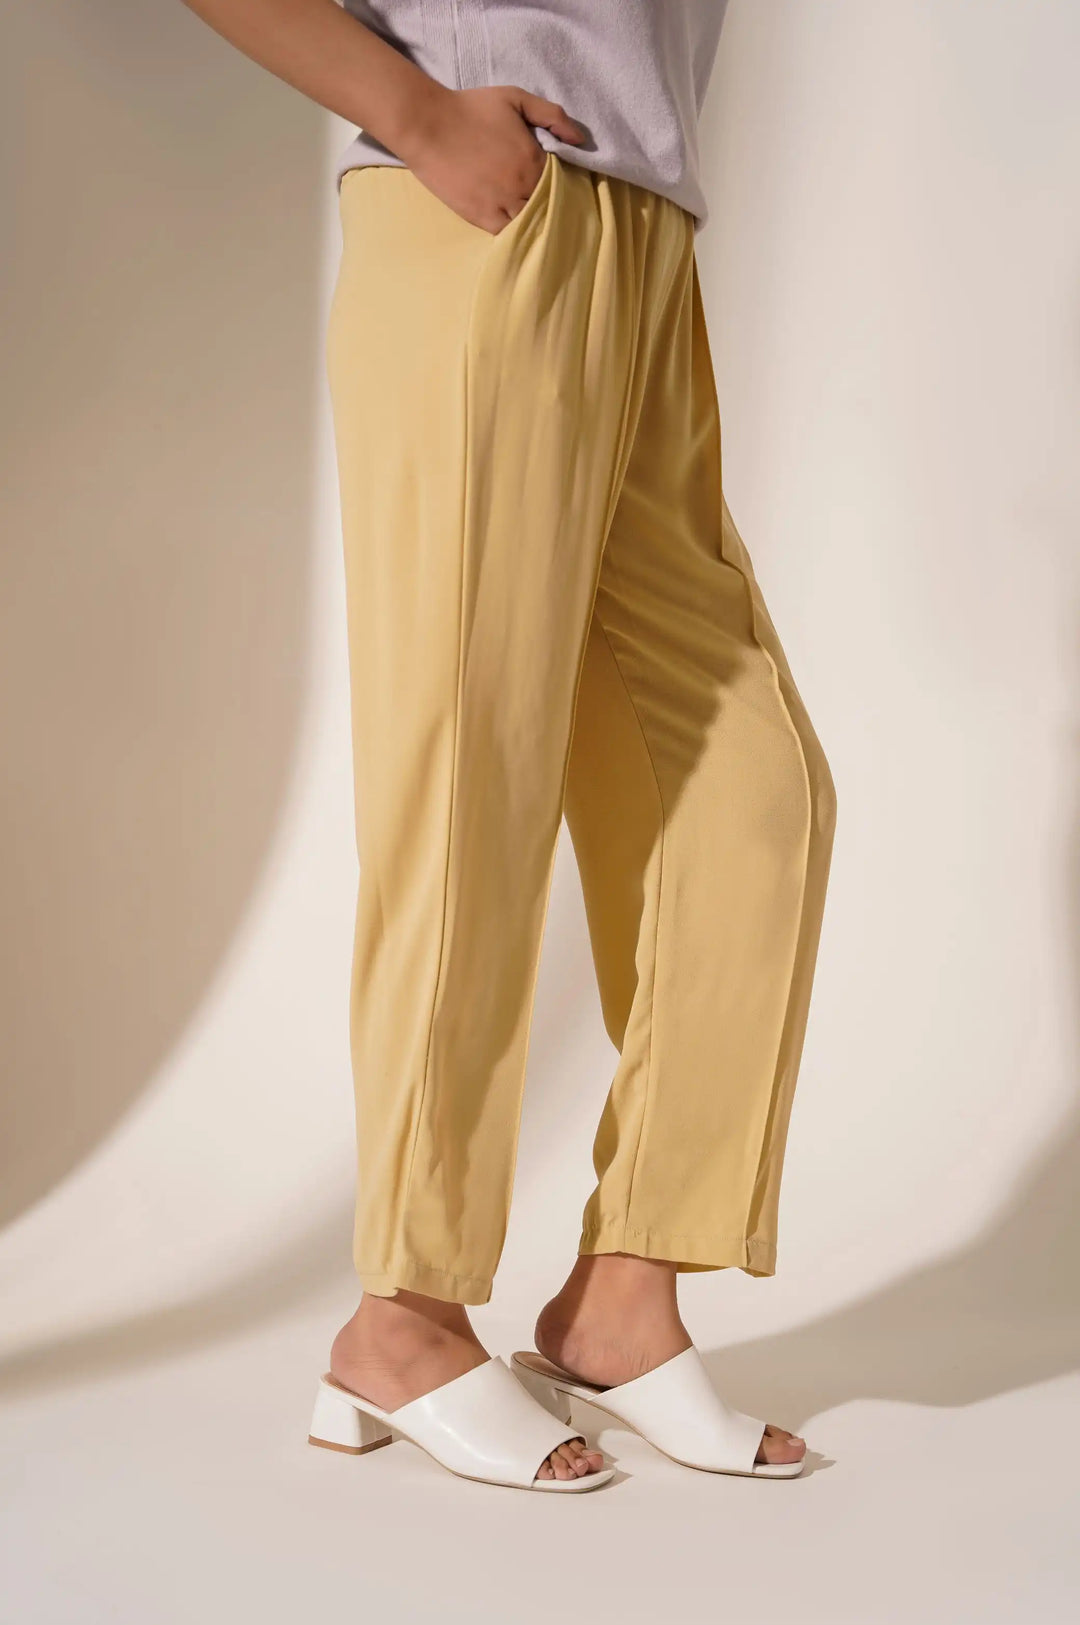 EASY POLY PANTS - SMART TROUSERS